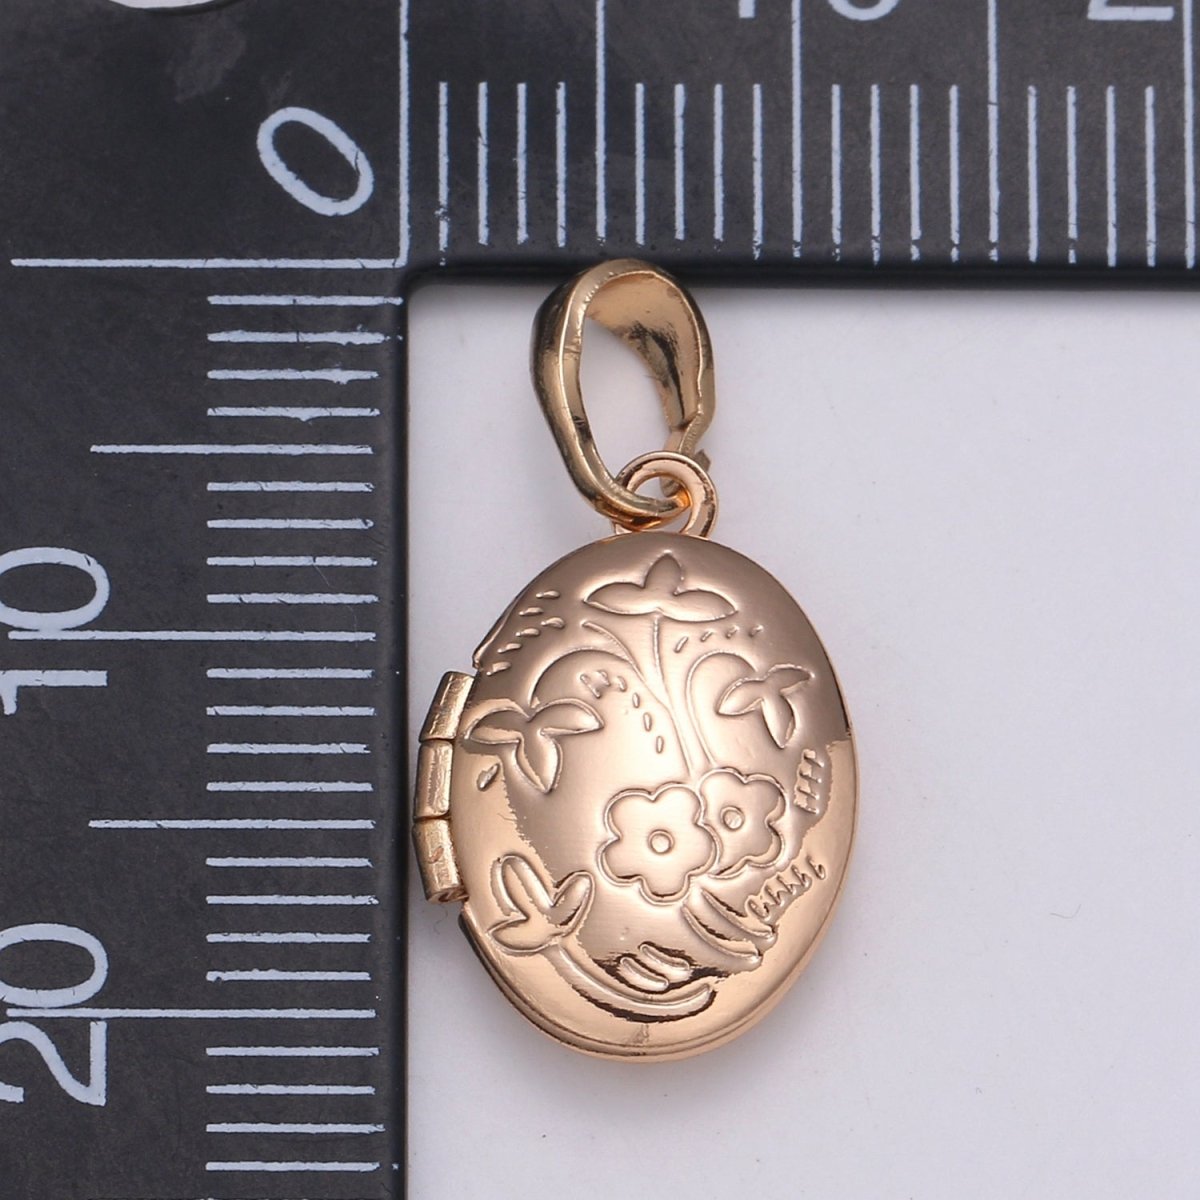 Rose Gold Filled Oval Locket Flower Photo Locket, Minimalist Jewelry, Necklace Pendant for Jewelry Making supply H-127 - DLUXCA